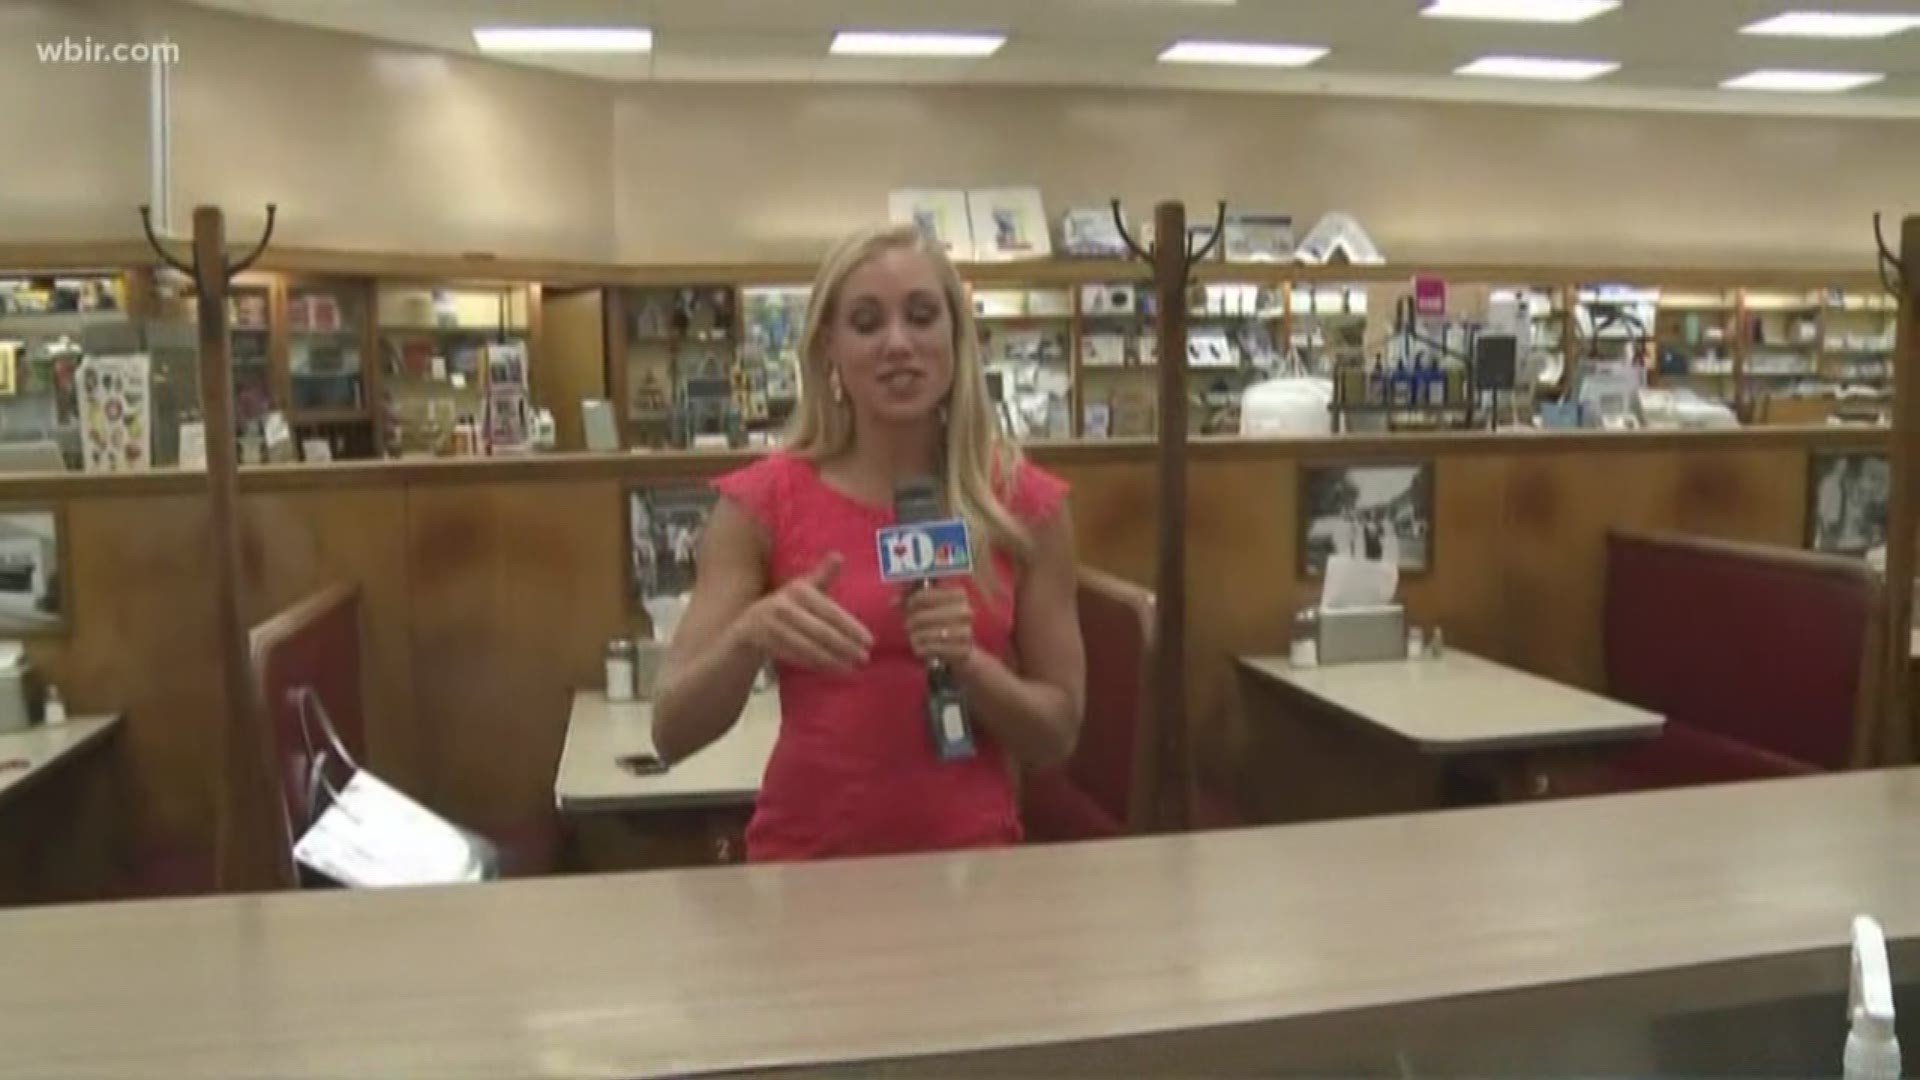 Leslie Ackerson shows you how to participate in Dine and Donate in Anderson County